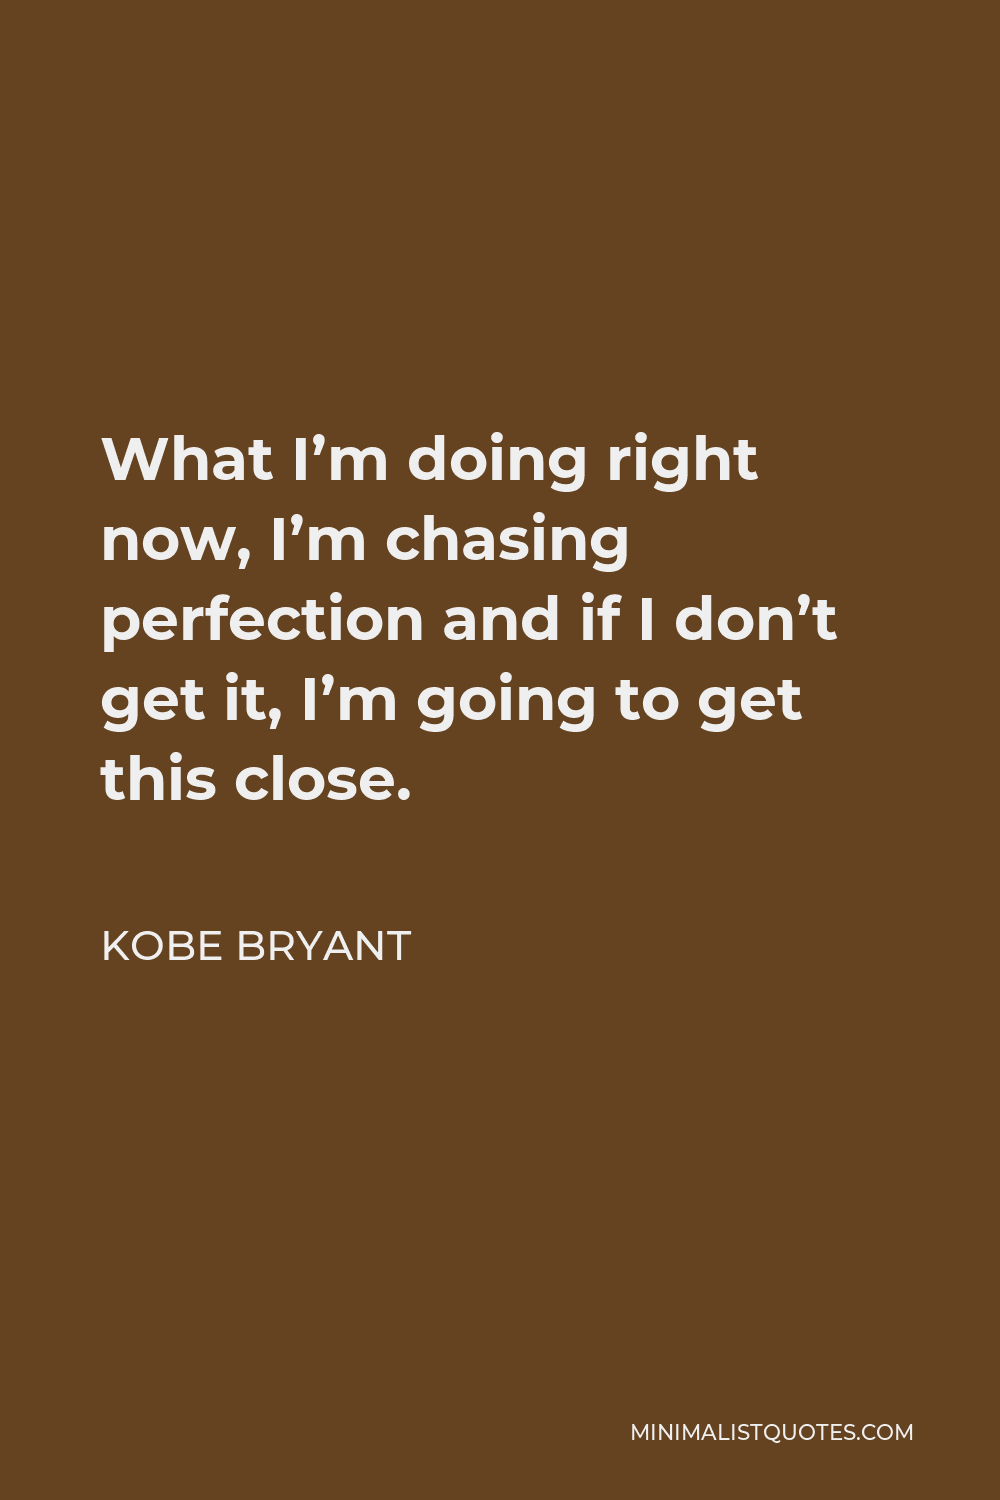 Kobe Bryant Quote - What I’m doing right now, I’m chasing perfection and if I don’t get it, I’m going to get this close.